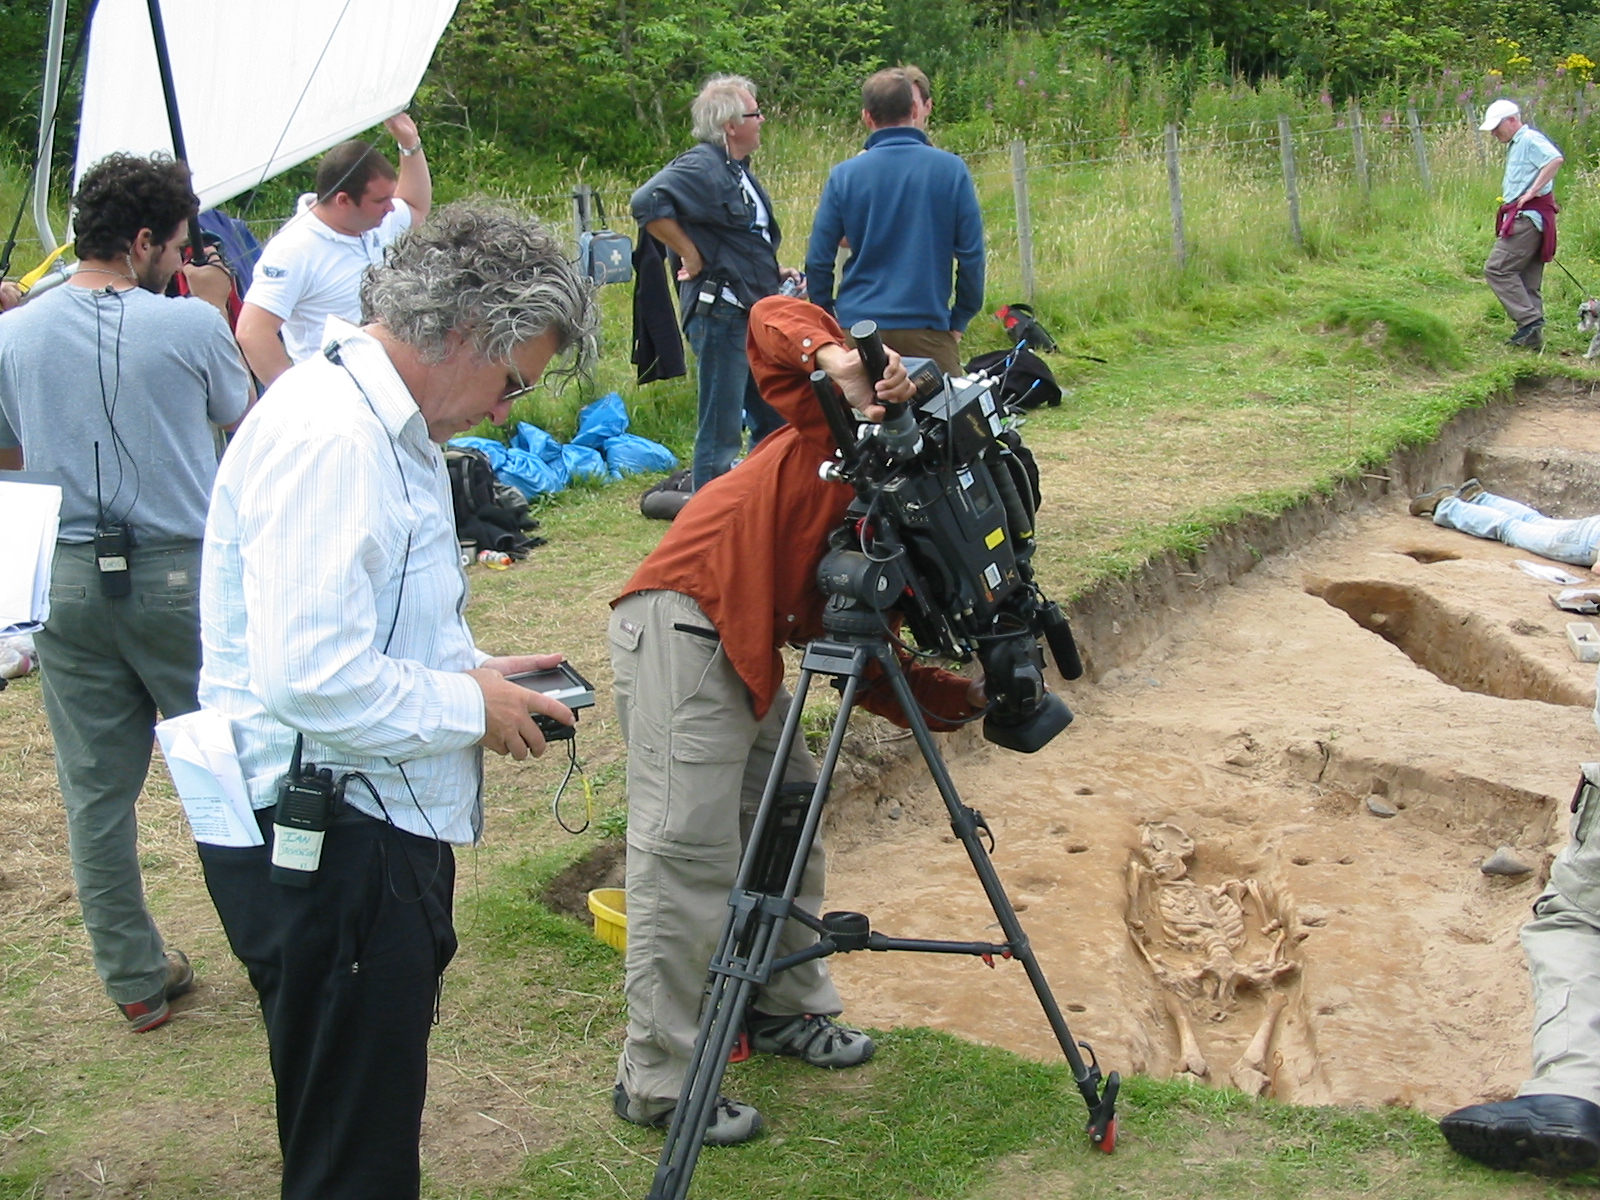 Australian TV director Ian Stevenson (foreground), directs The Discovery Channel's 'Bone Detectives', on location in northern England. Ancient mummy lies in grave. More at www.ianstevenson.tv